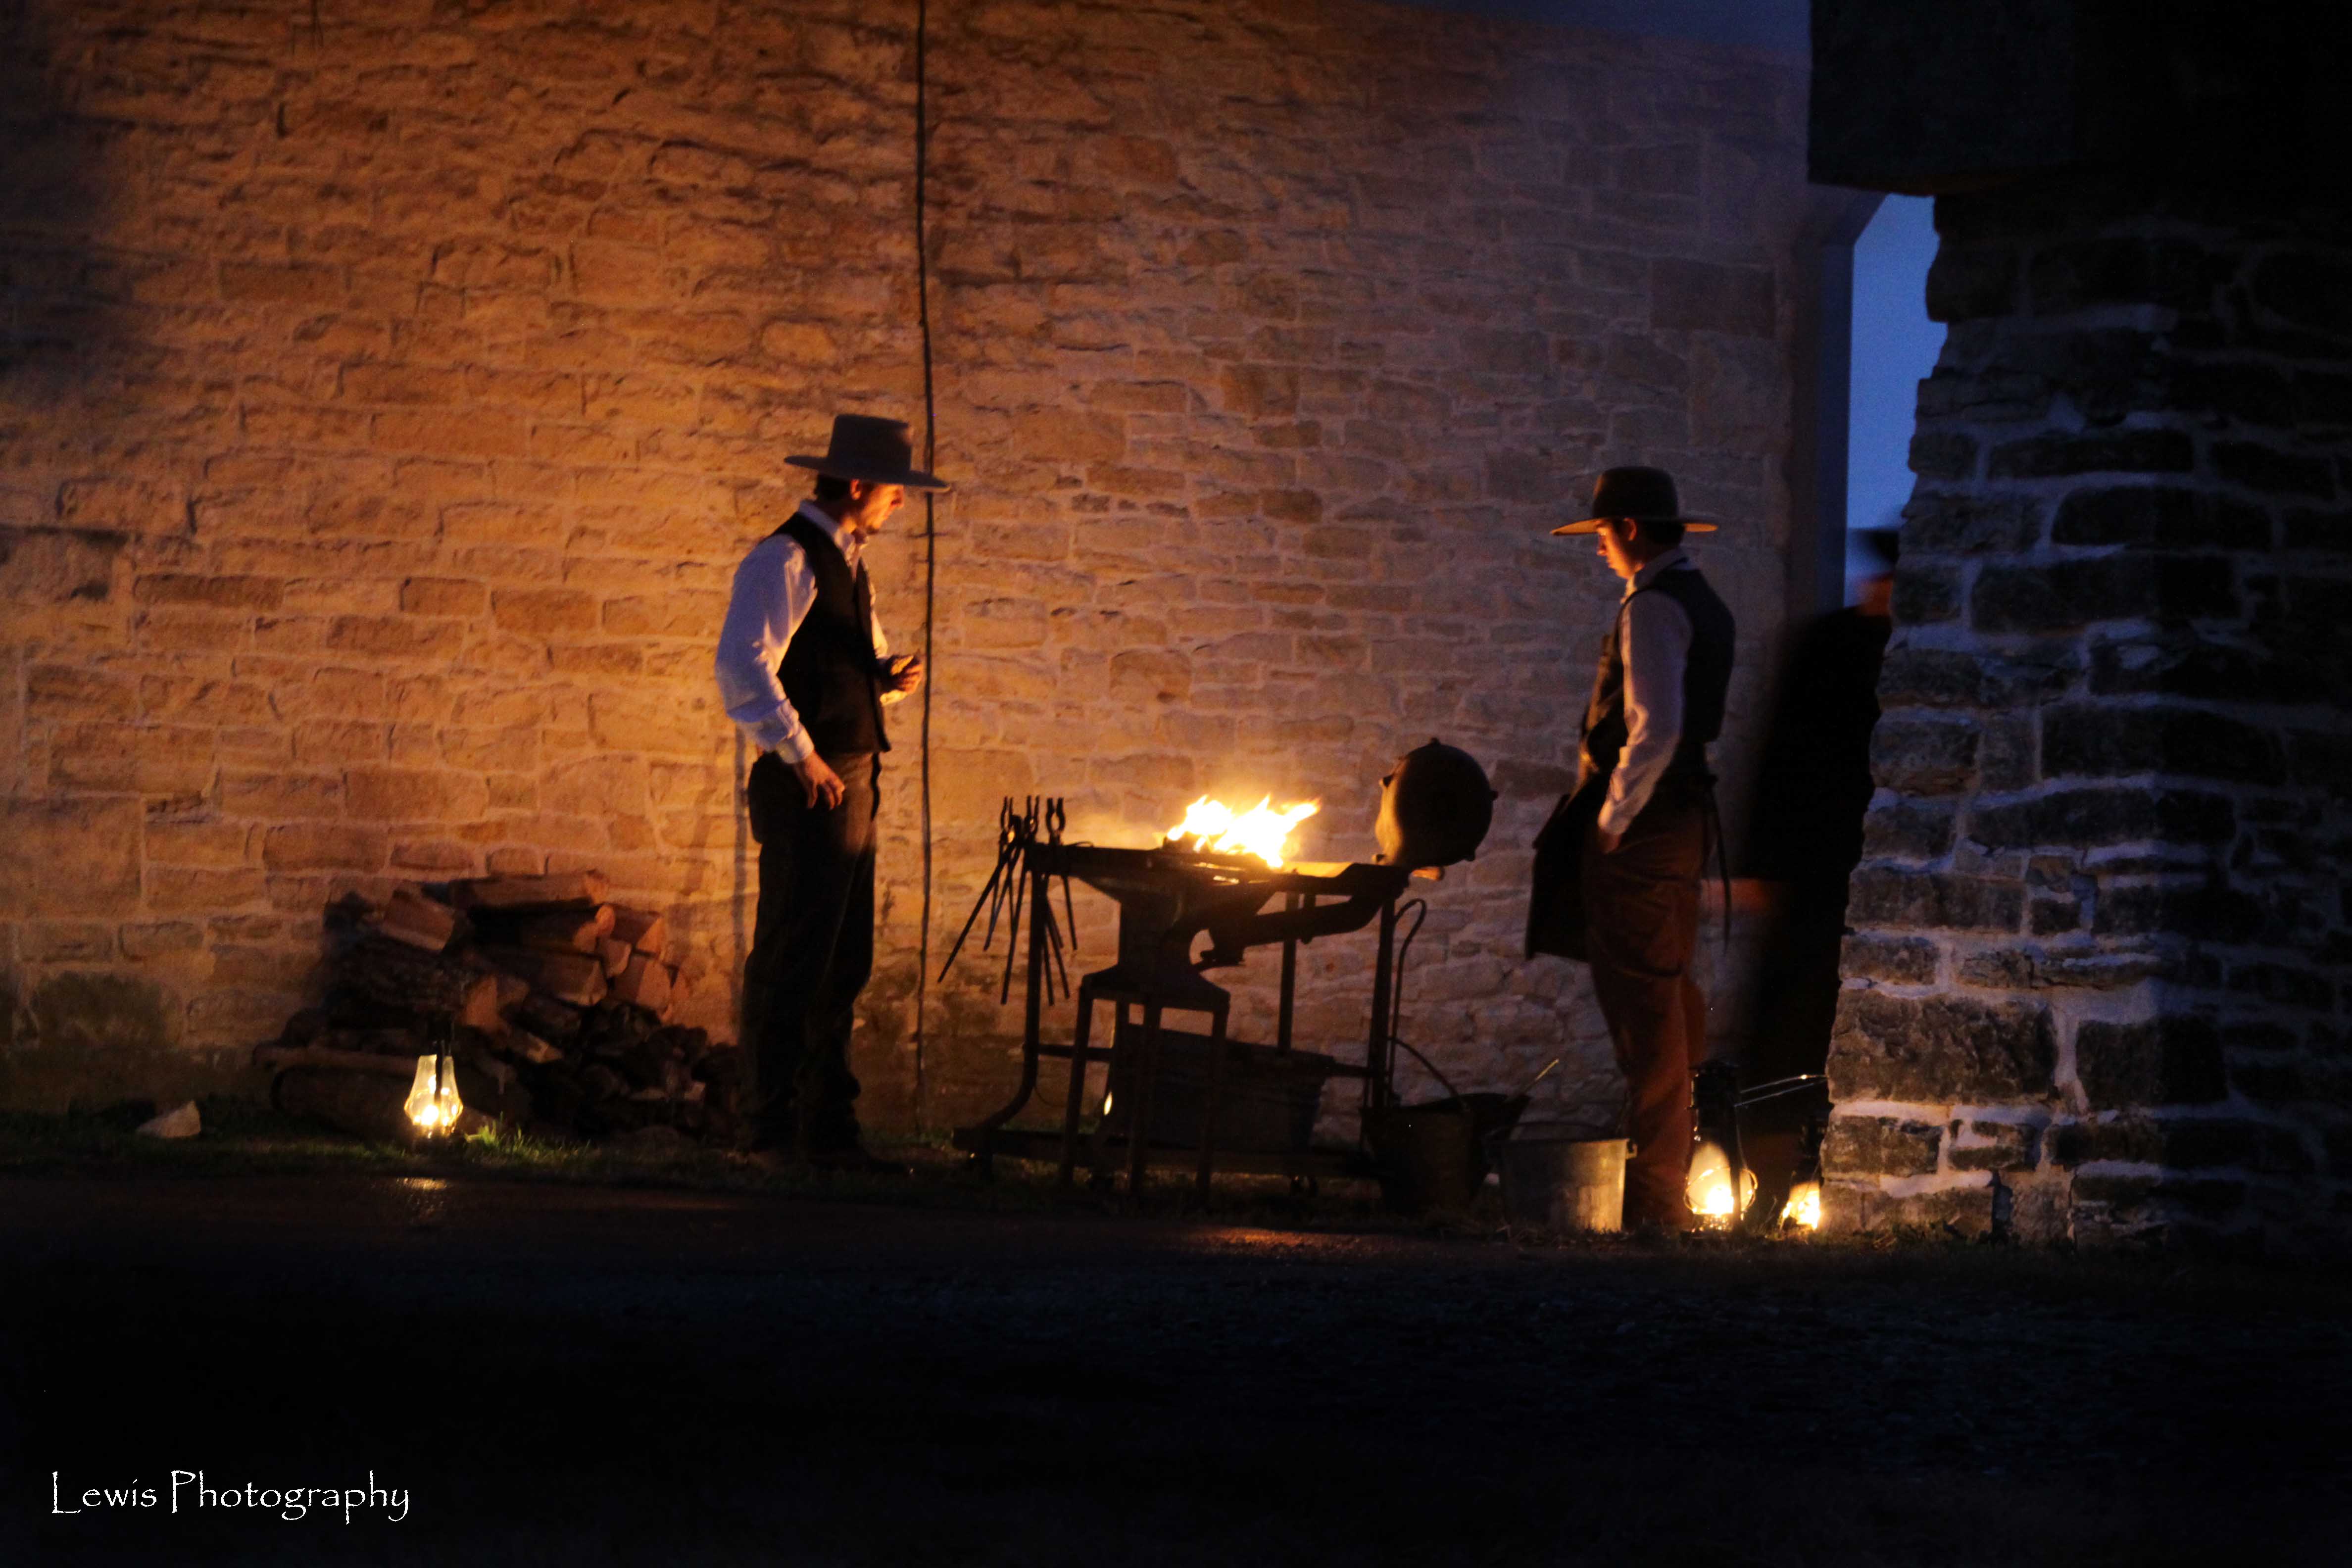 cowboys working hot metal in the forge among lantern light